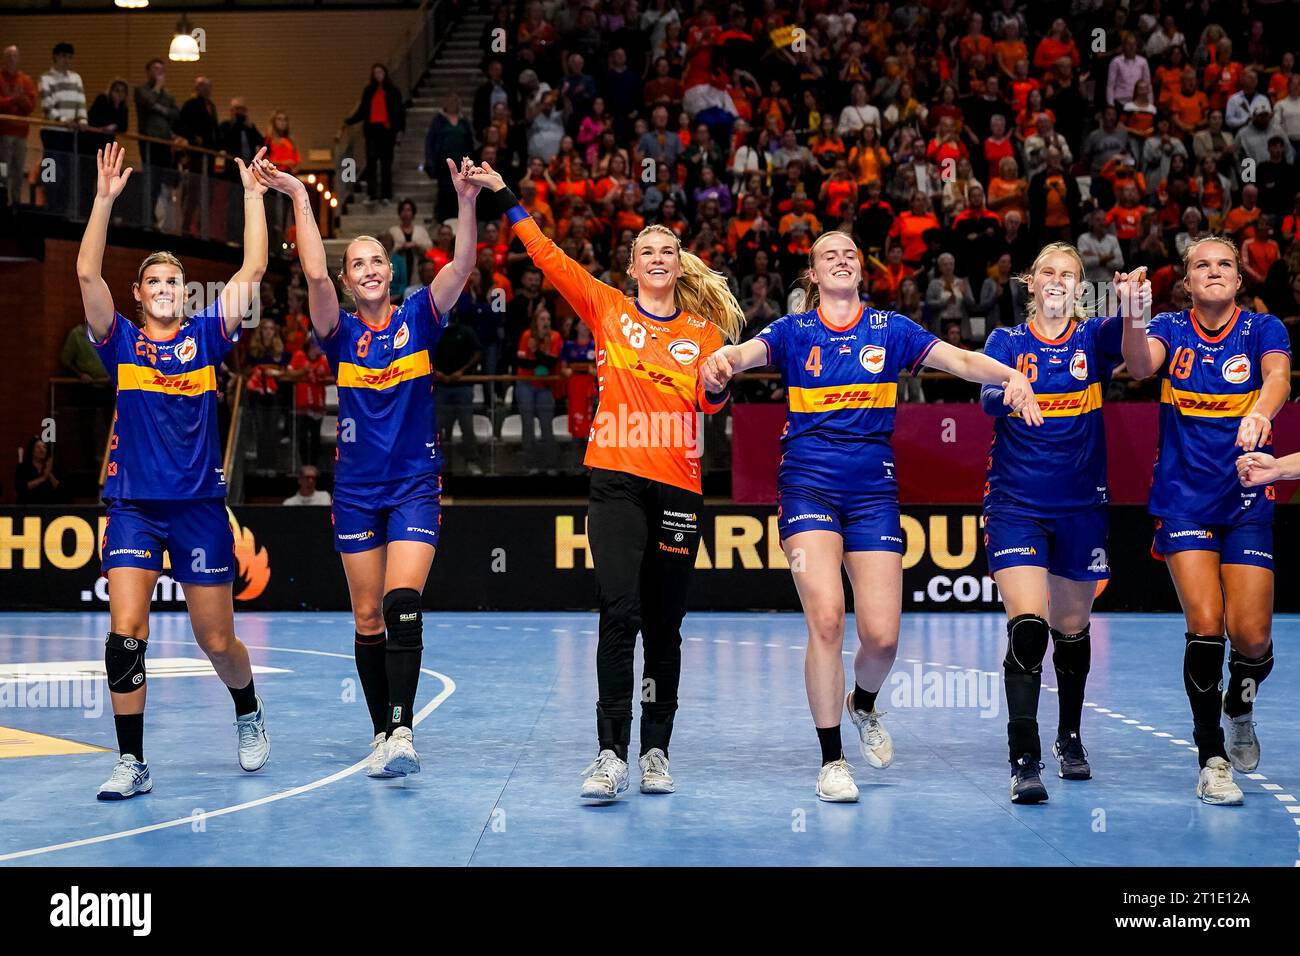 Almere, Netherlands. 12th Oct, 2023. ALMERE, NETHERLANDS - OCTOBER 12: Angela Malestein of the Netherlands, Lois Abbingh of the Netherlands, Goalkeeper Tess Lieder of the Netherlands, Alieke van Maurik of the Netherlands, Tamara Haggerty of the Netherlands and Merel Freriks of the Netherlands celebrate their team's win after the Women's EHF Euro 2024 Qualifiying match between Netherlands and Portugal at Topsportcentrum Almere on October 12, 2023 in Almere, Netherlands (Photo by Rene Nijhuis/BSR Agency) Credit: BSR Agency/Alamy Live News Stock Photo